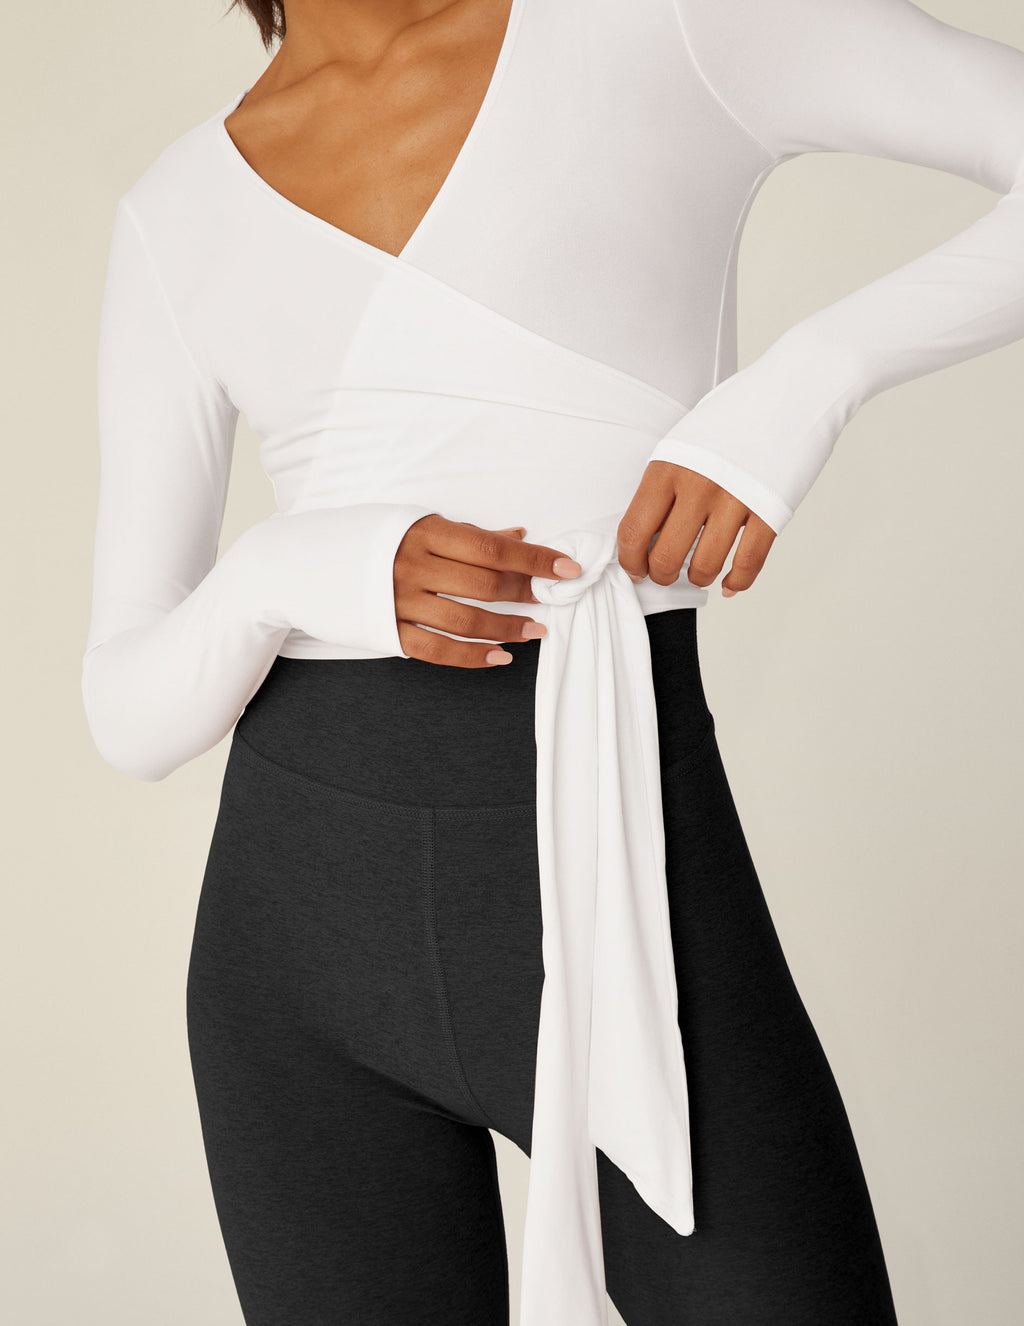 Featherweight Waist No Time Wrap Top Featured Image